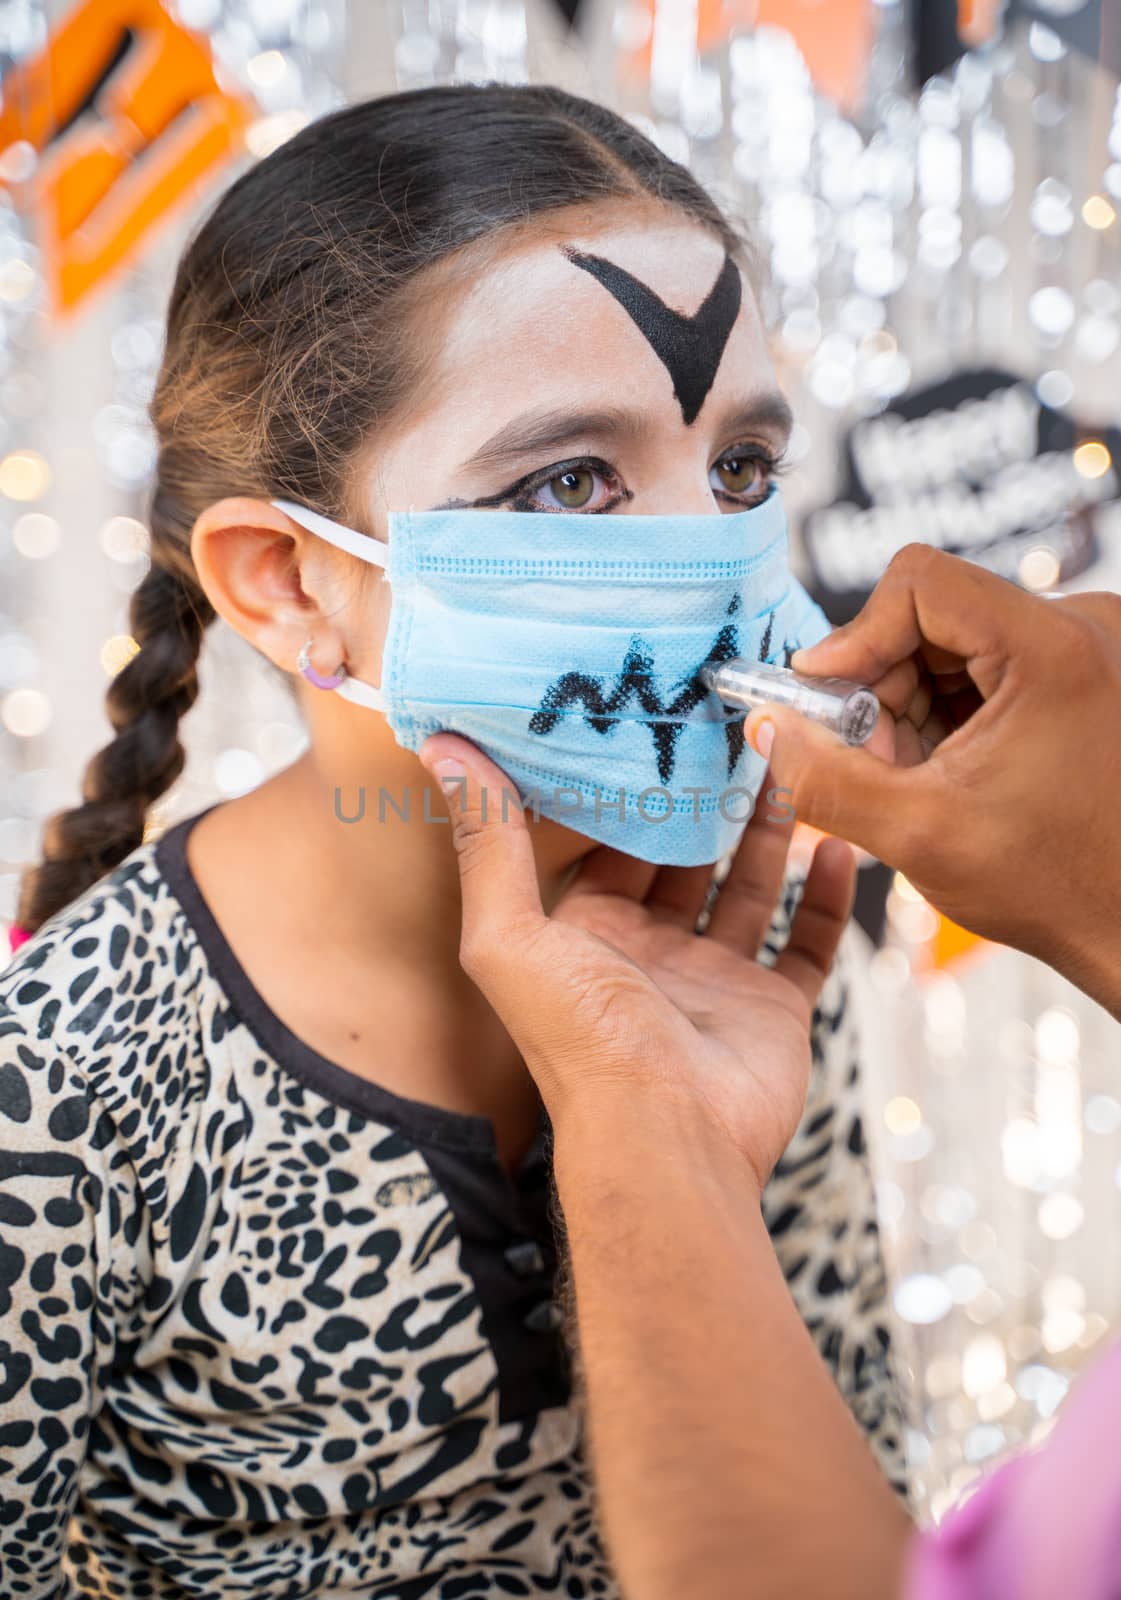 kid getting ready or preparing for Halloween by painting on medical face mask - concept of holiday, halloween, and childhood festival celebration and preparation. by lakshmiprasad.maski@gmai.com